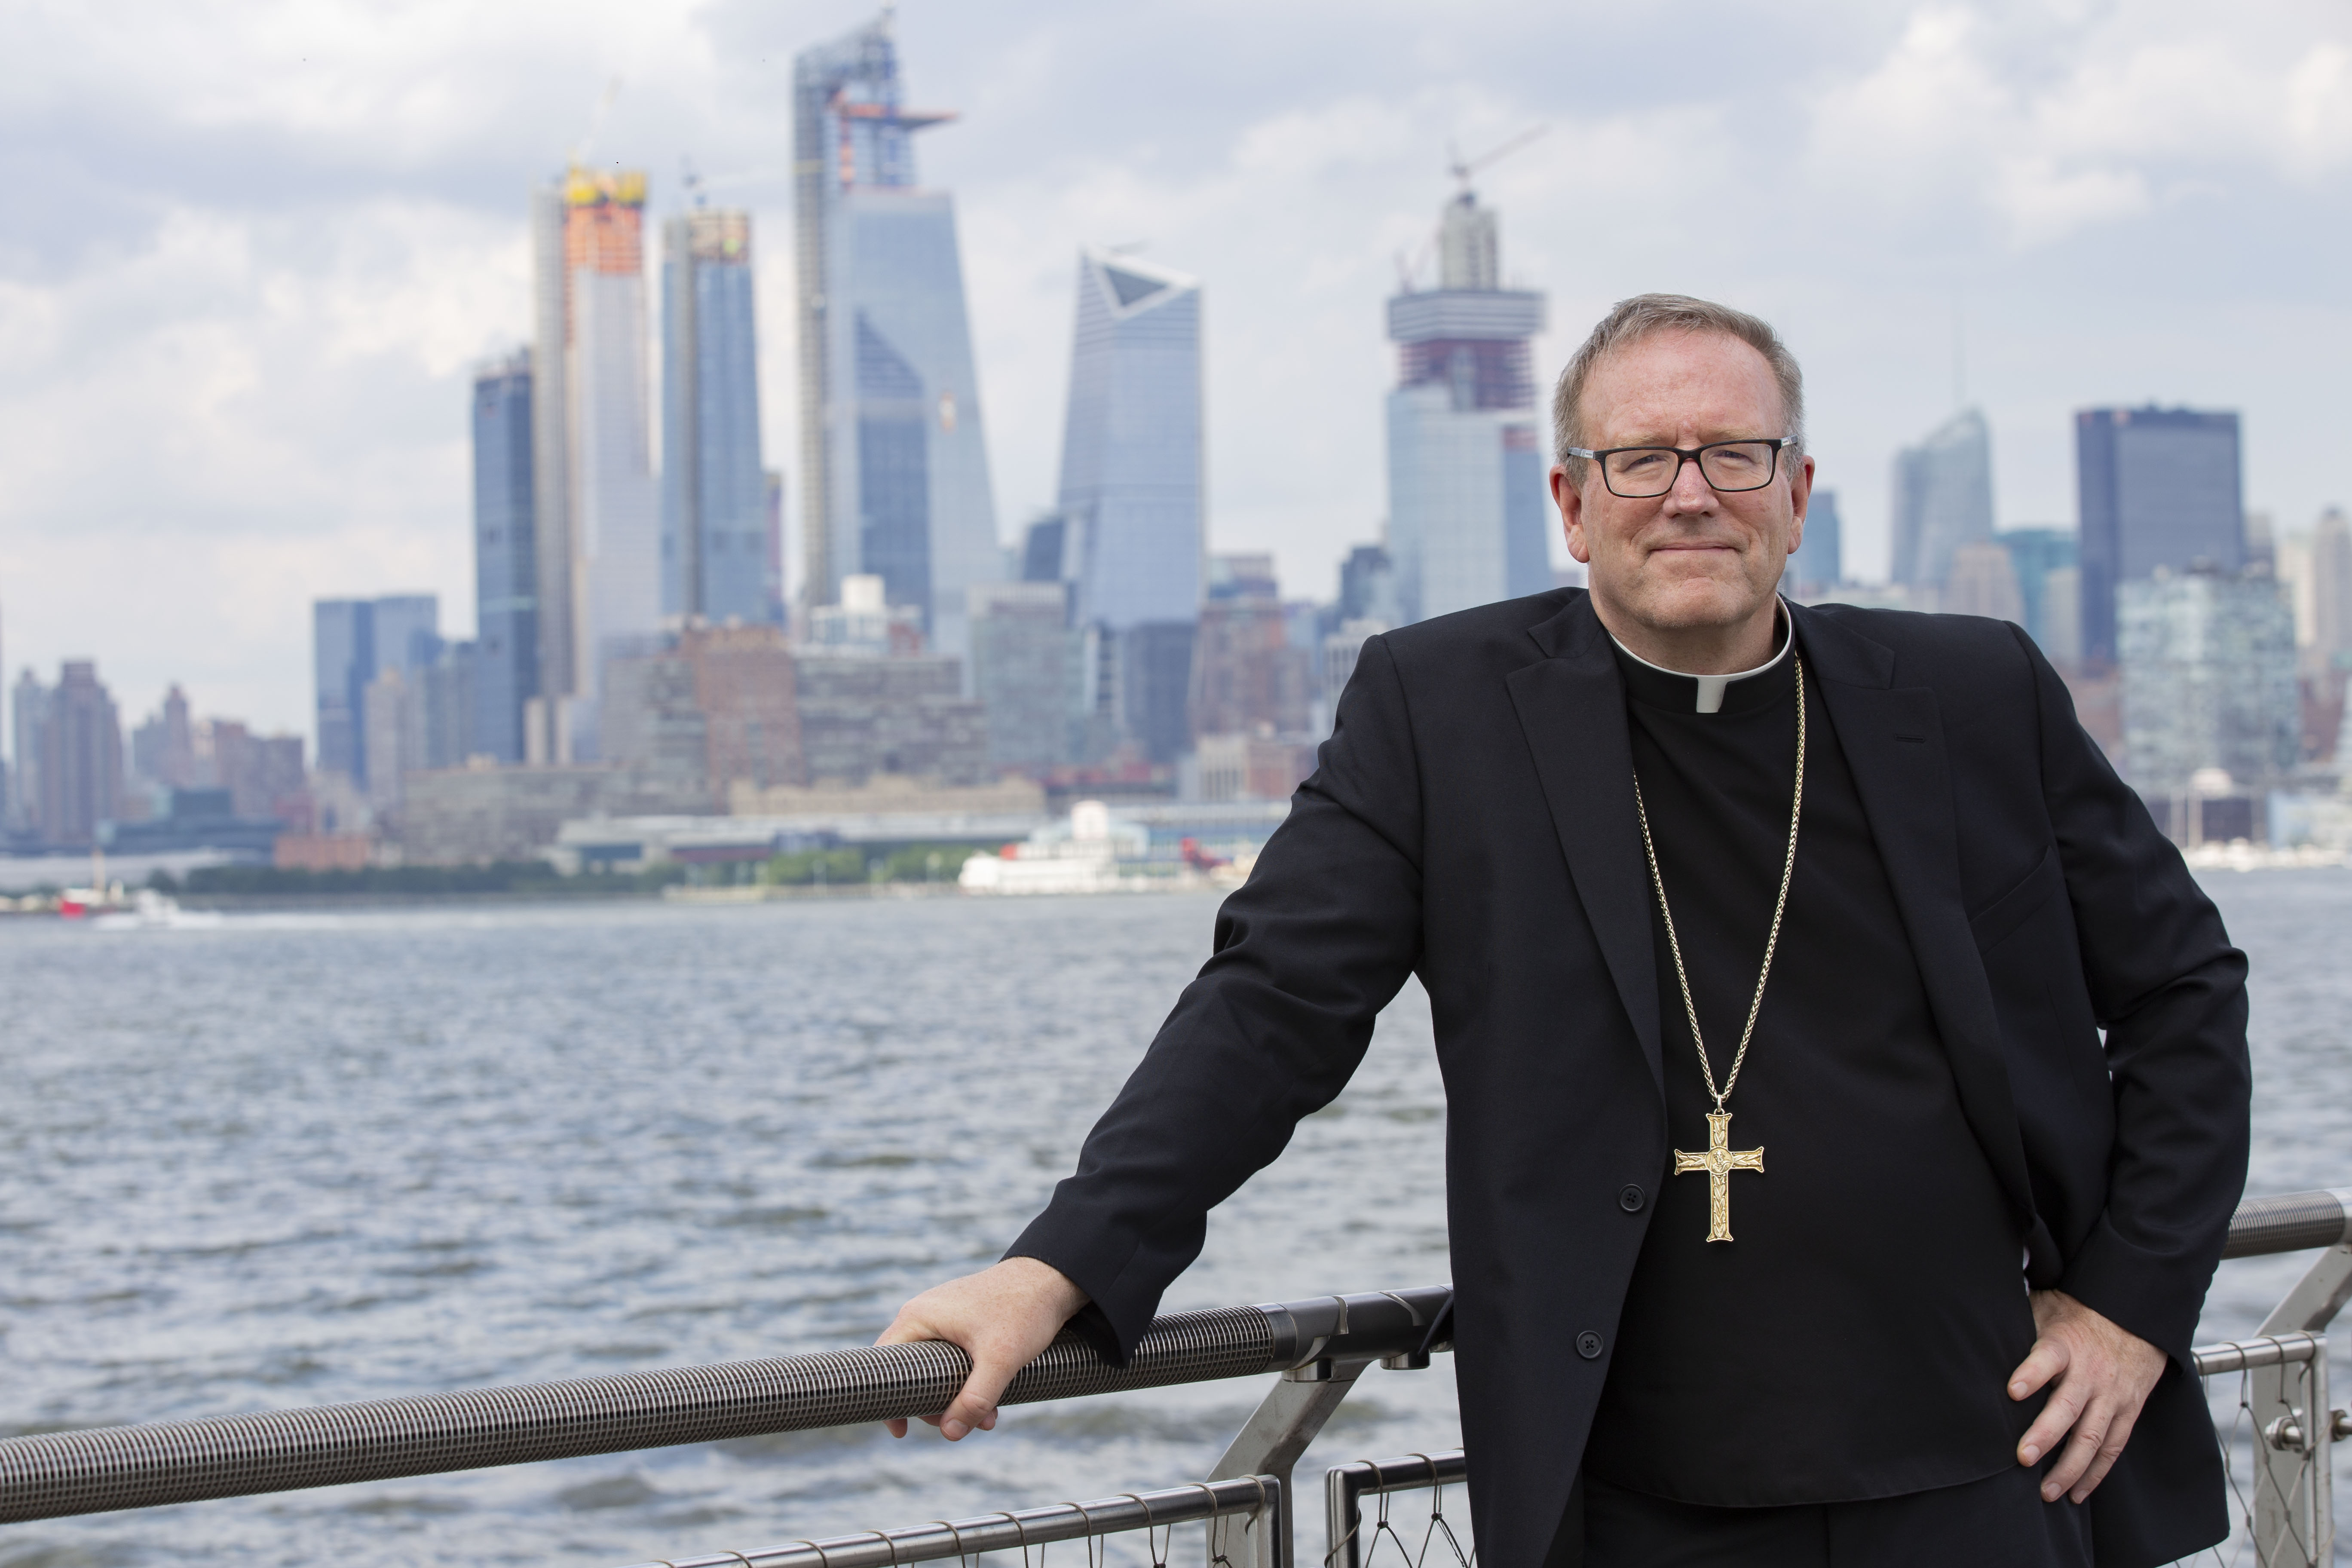 Bishop Barron with a cityscape